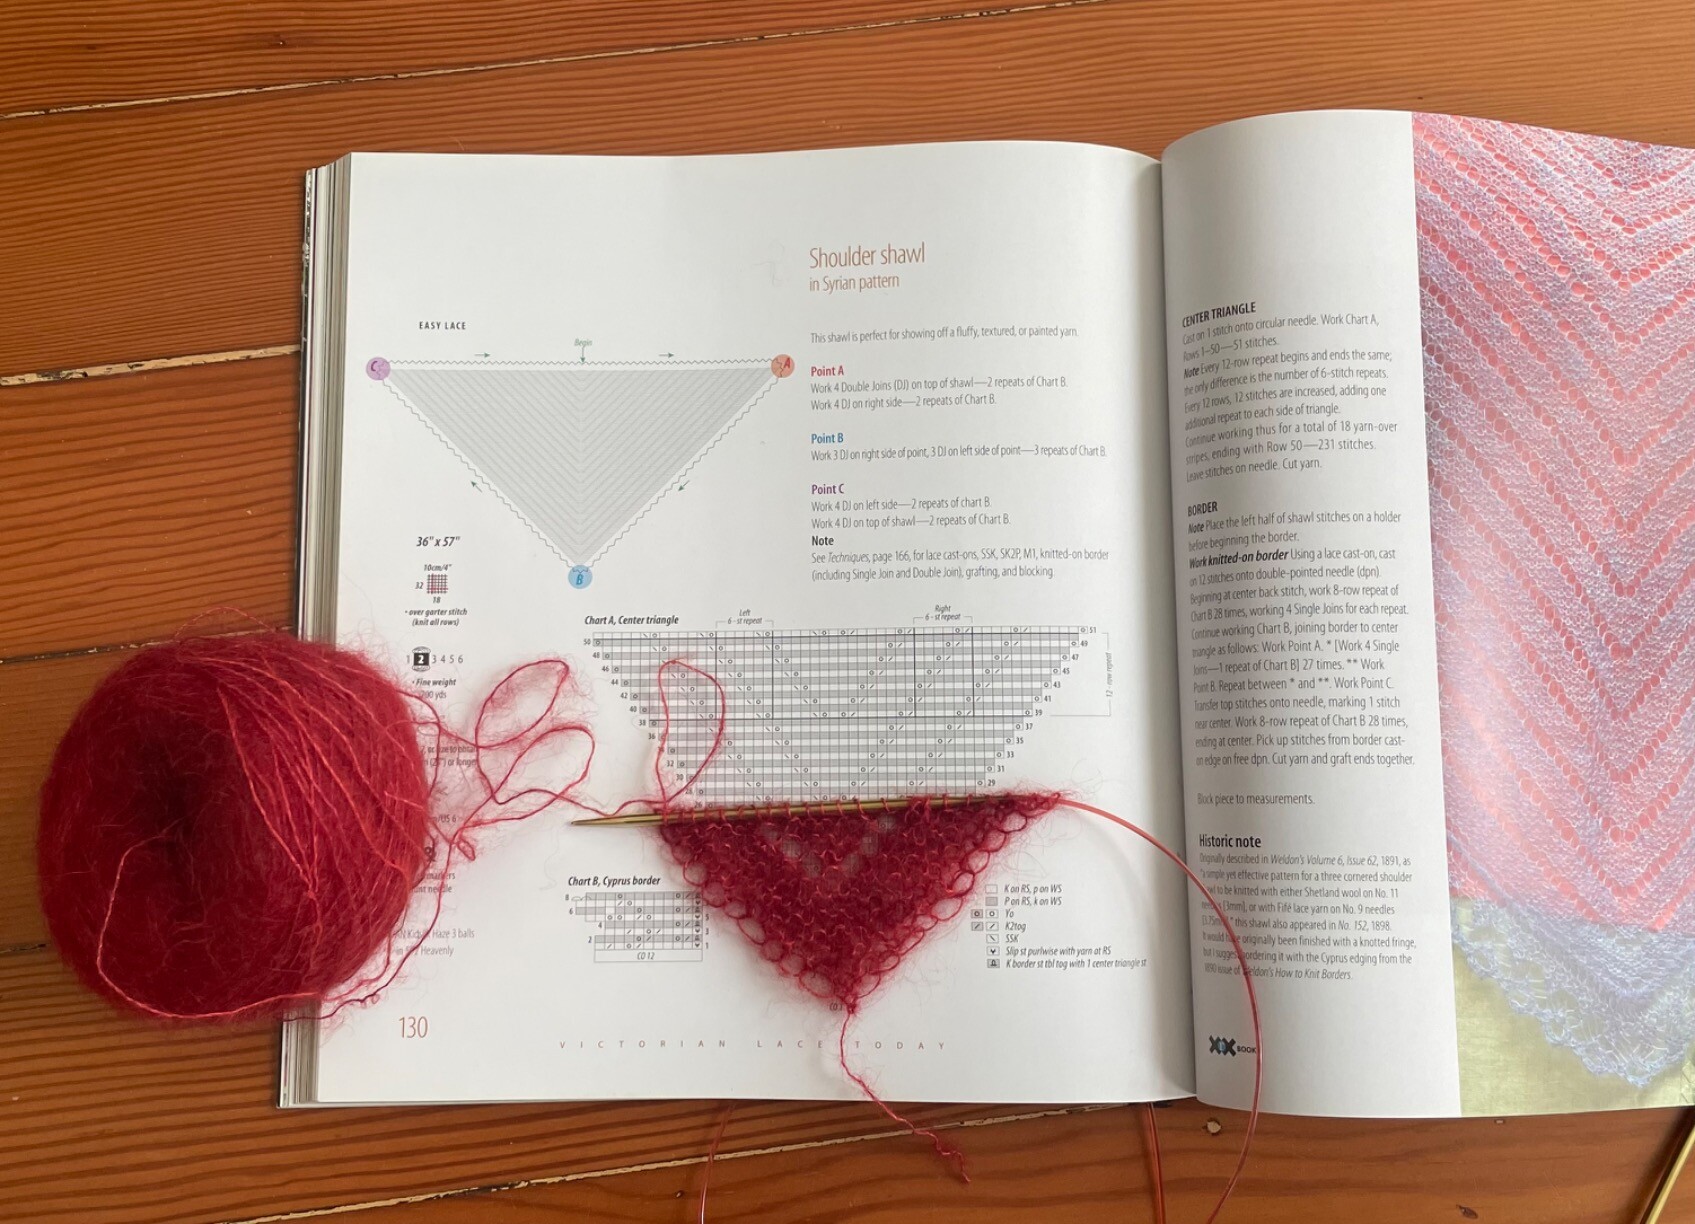 The very beginning of a triangular knit shawl lies on top of an open book with the pattern for that shawl.